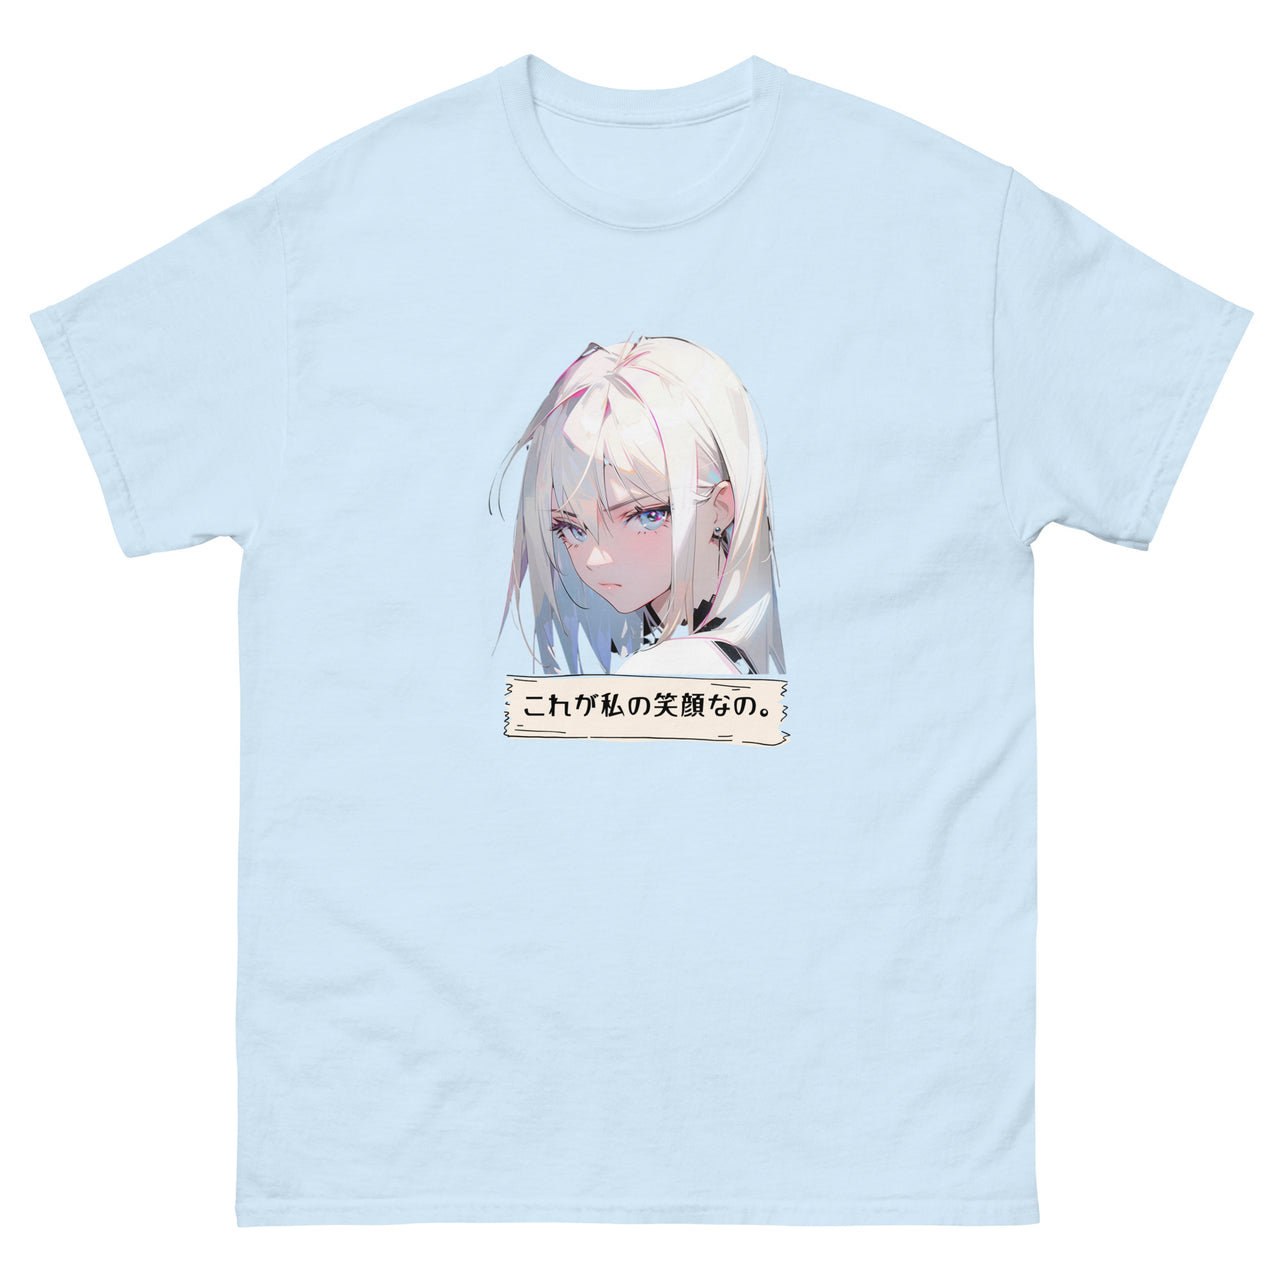 This is my Smiling Face Anime Girl Anime-Styled Shirt